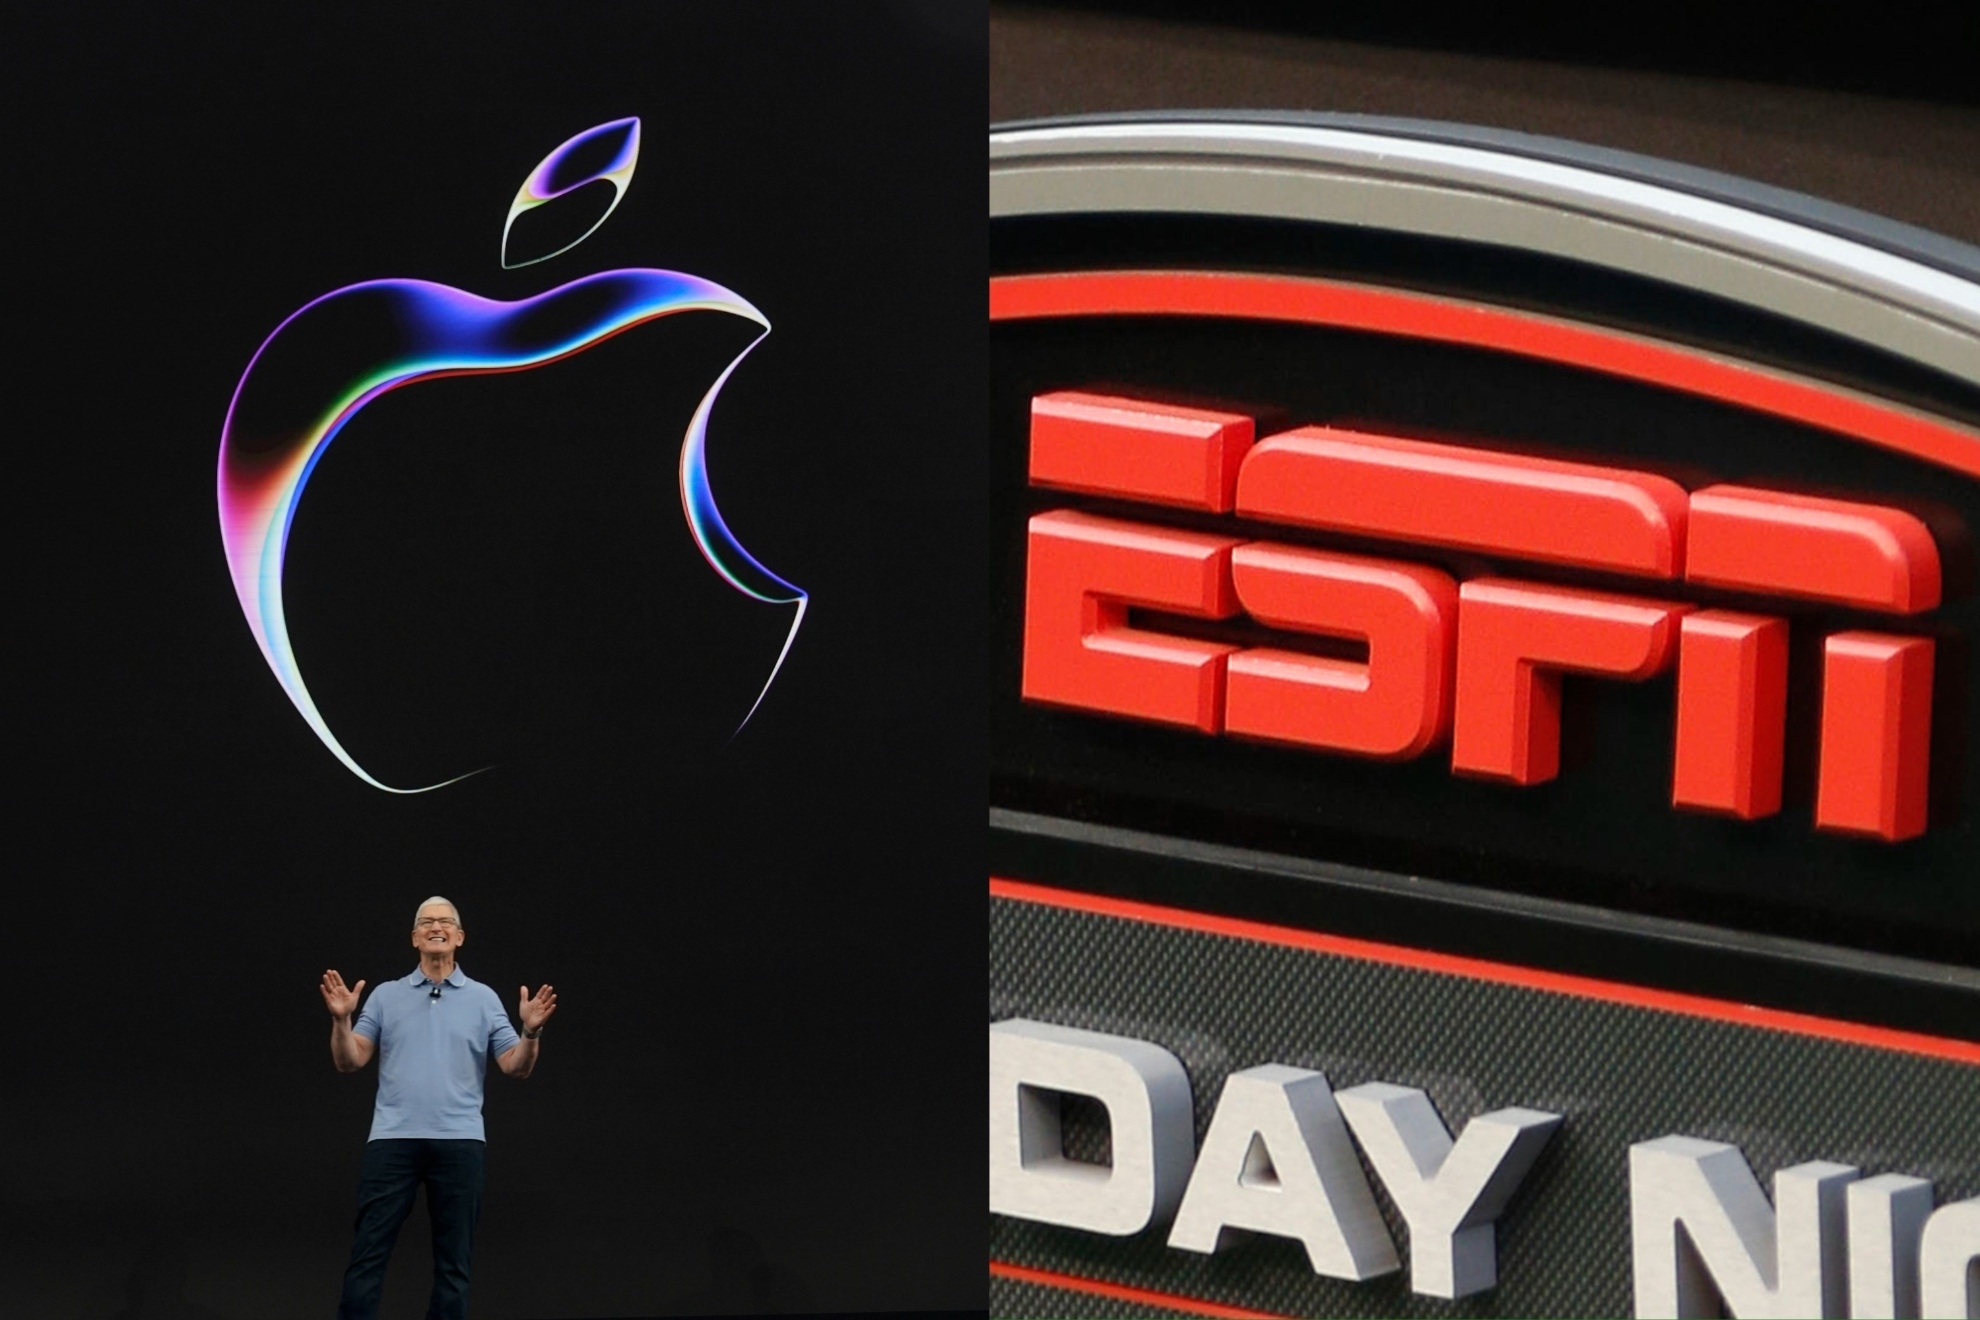 Apple reportedly has plans to buy ESPN and get rights to NBA, NFL